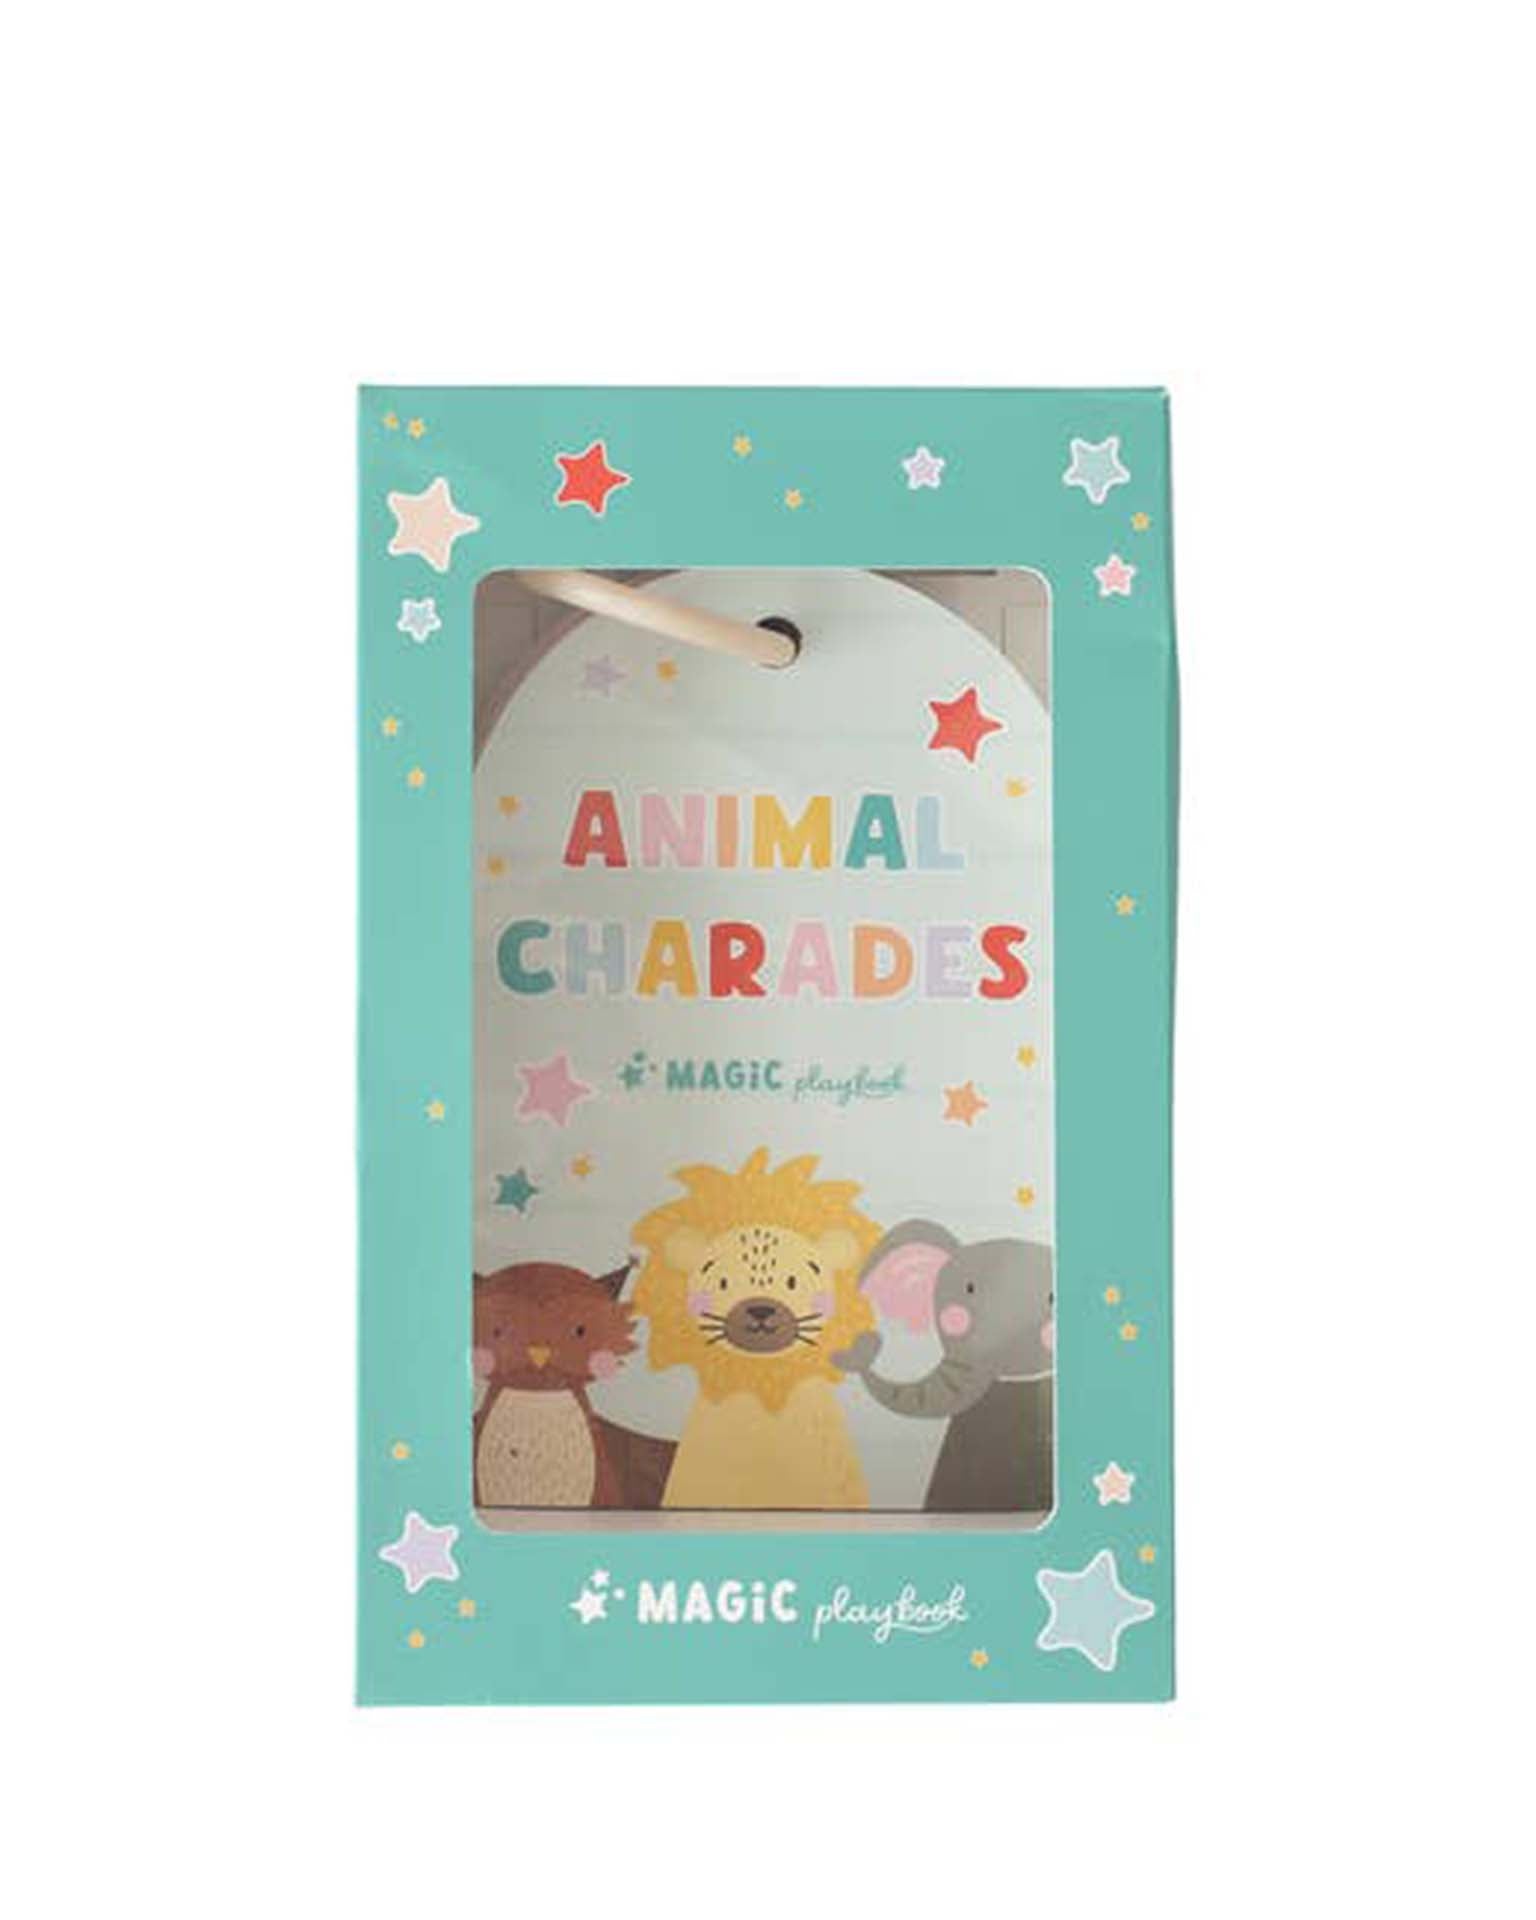 Little magic playbook Paper + Party animal charade prompt cards